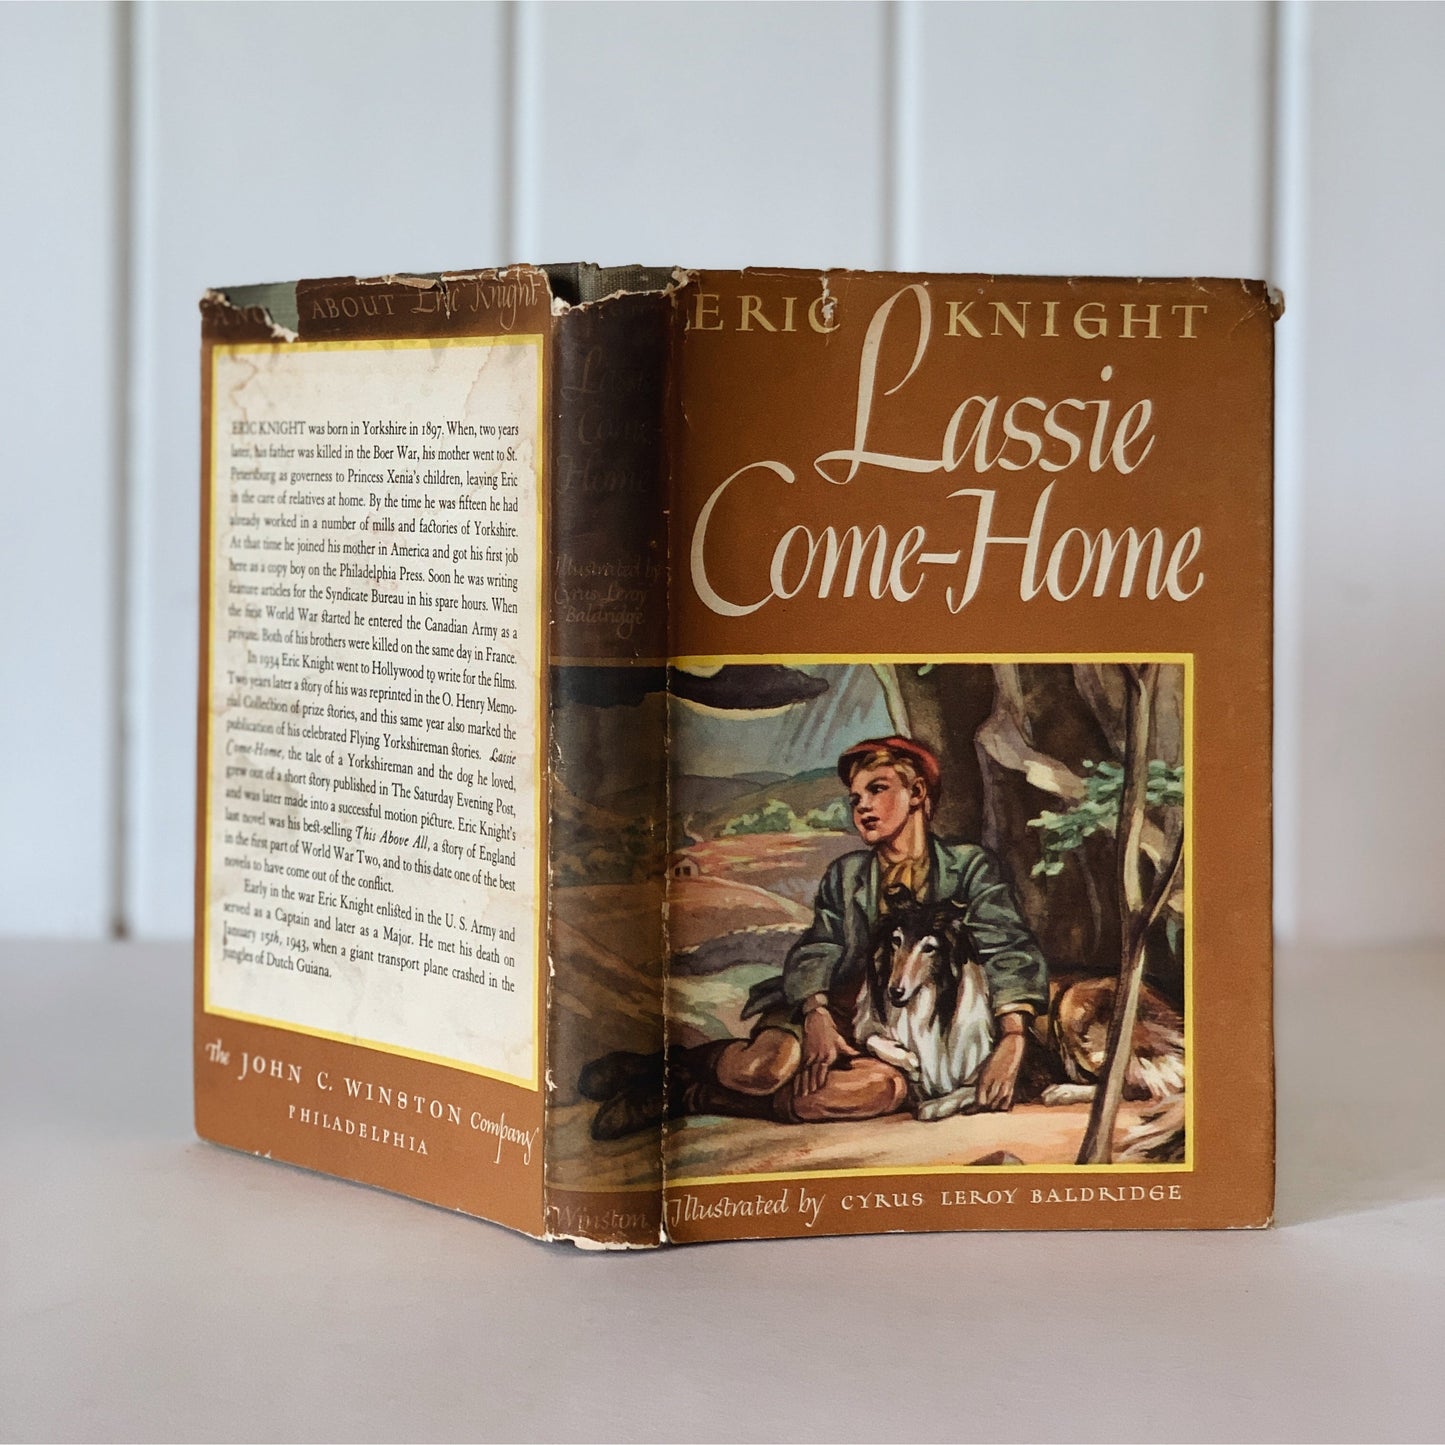 Lassie Come Home, Eric Knight, 1940, People's Book Club Edition, Hardcover DJ